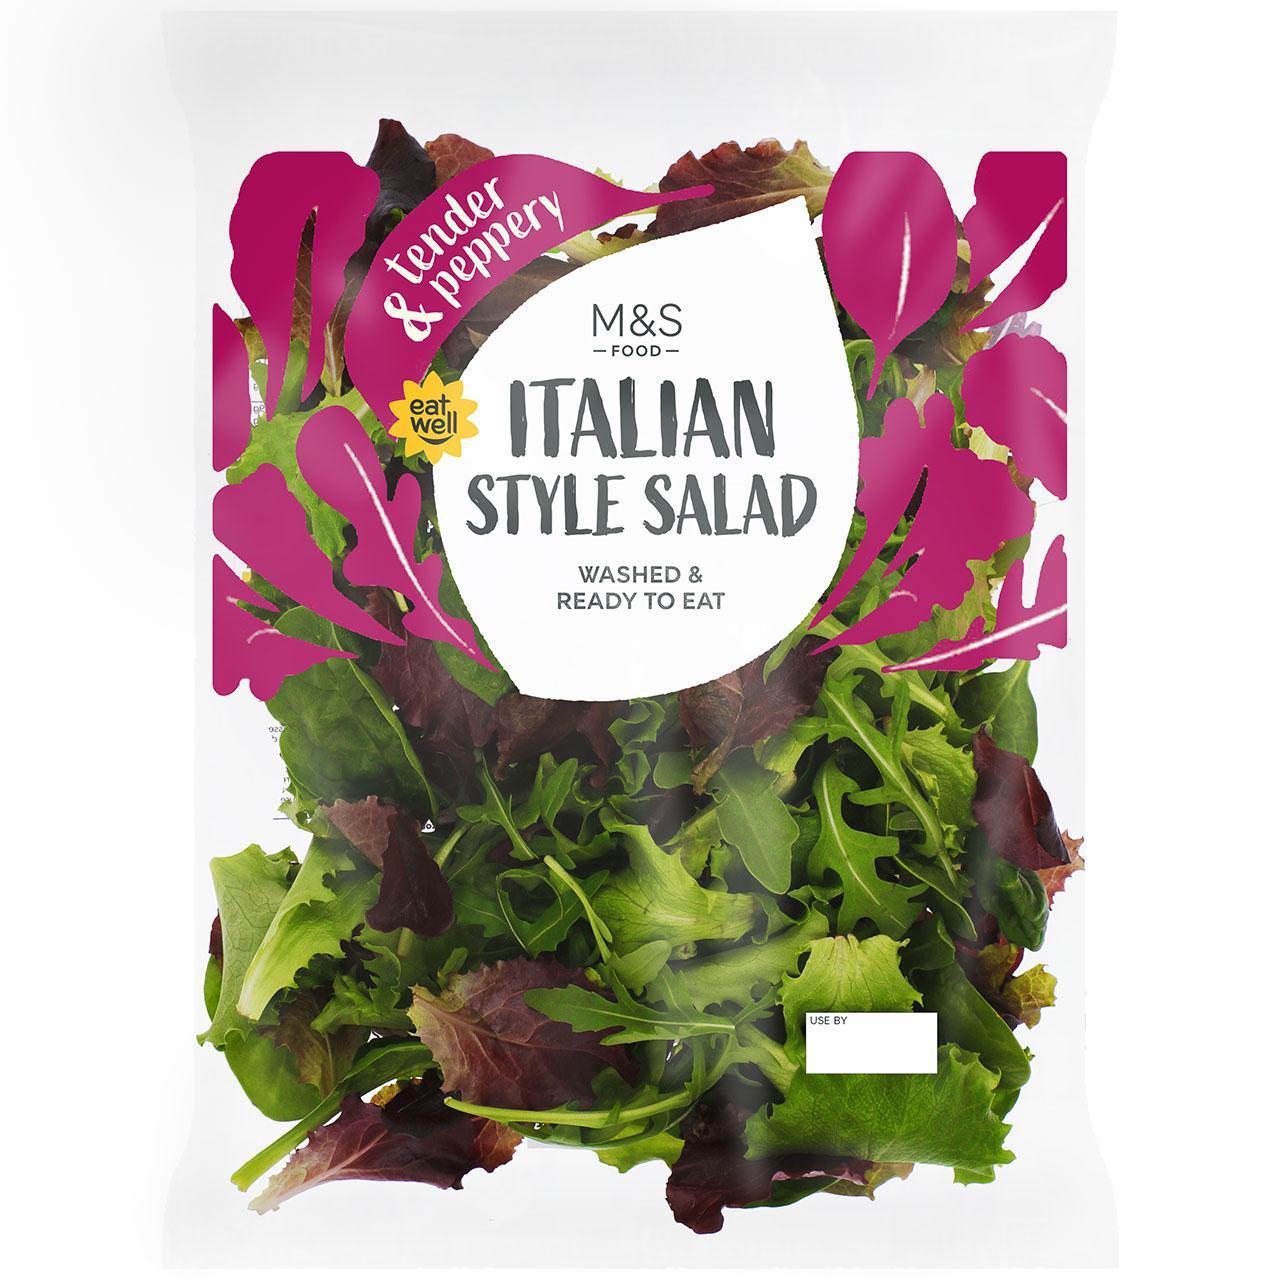 M&S Italian Style Baby Leaf Salad Washed & Ready to Eat